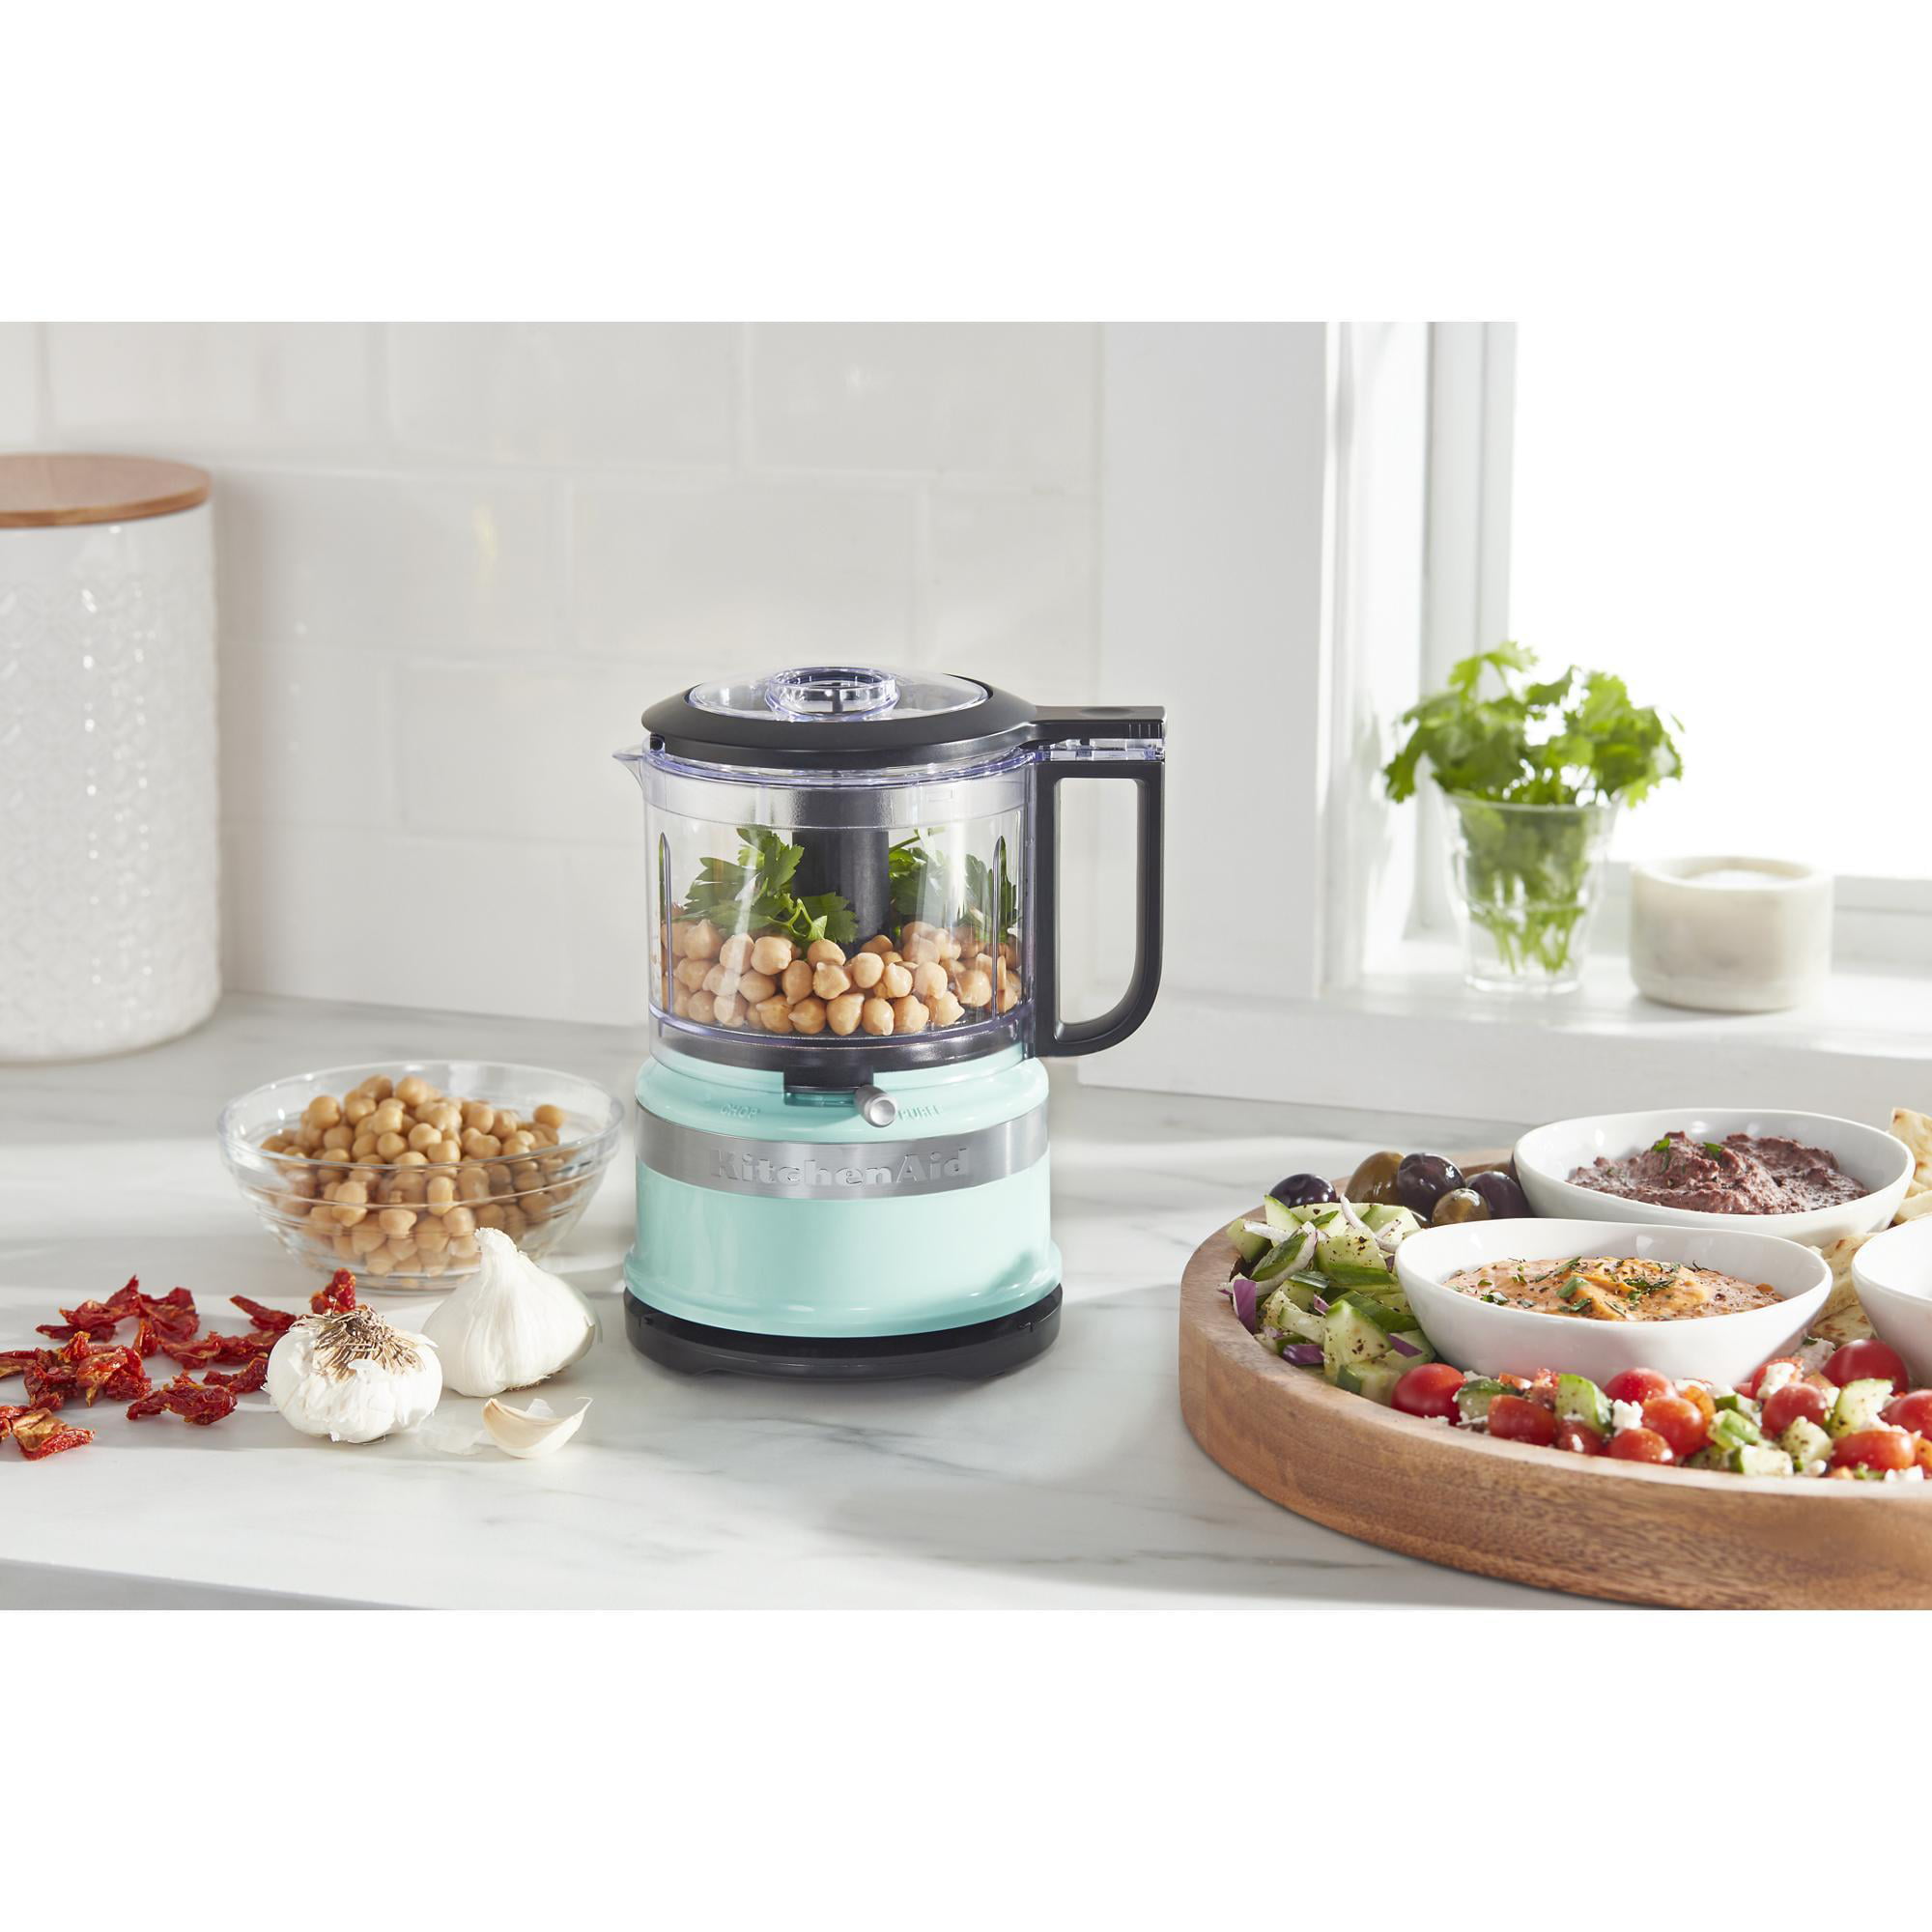 Testing the Kitchen Aid 3.5 Mini Chopper with 3 must try recipes